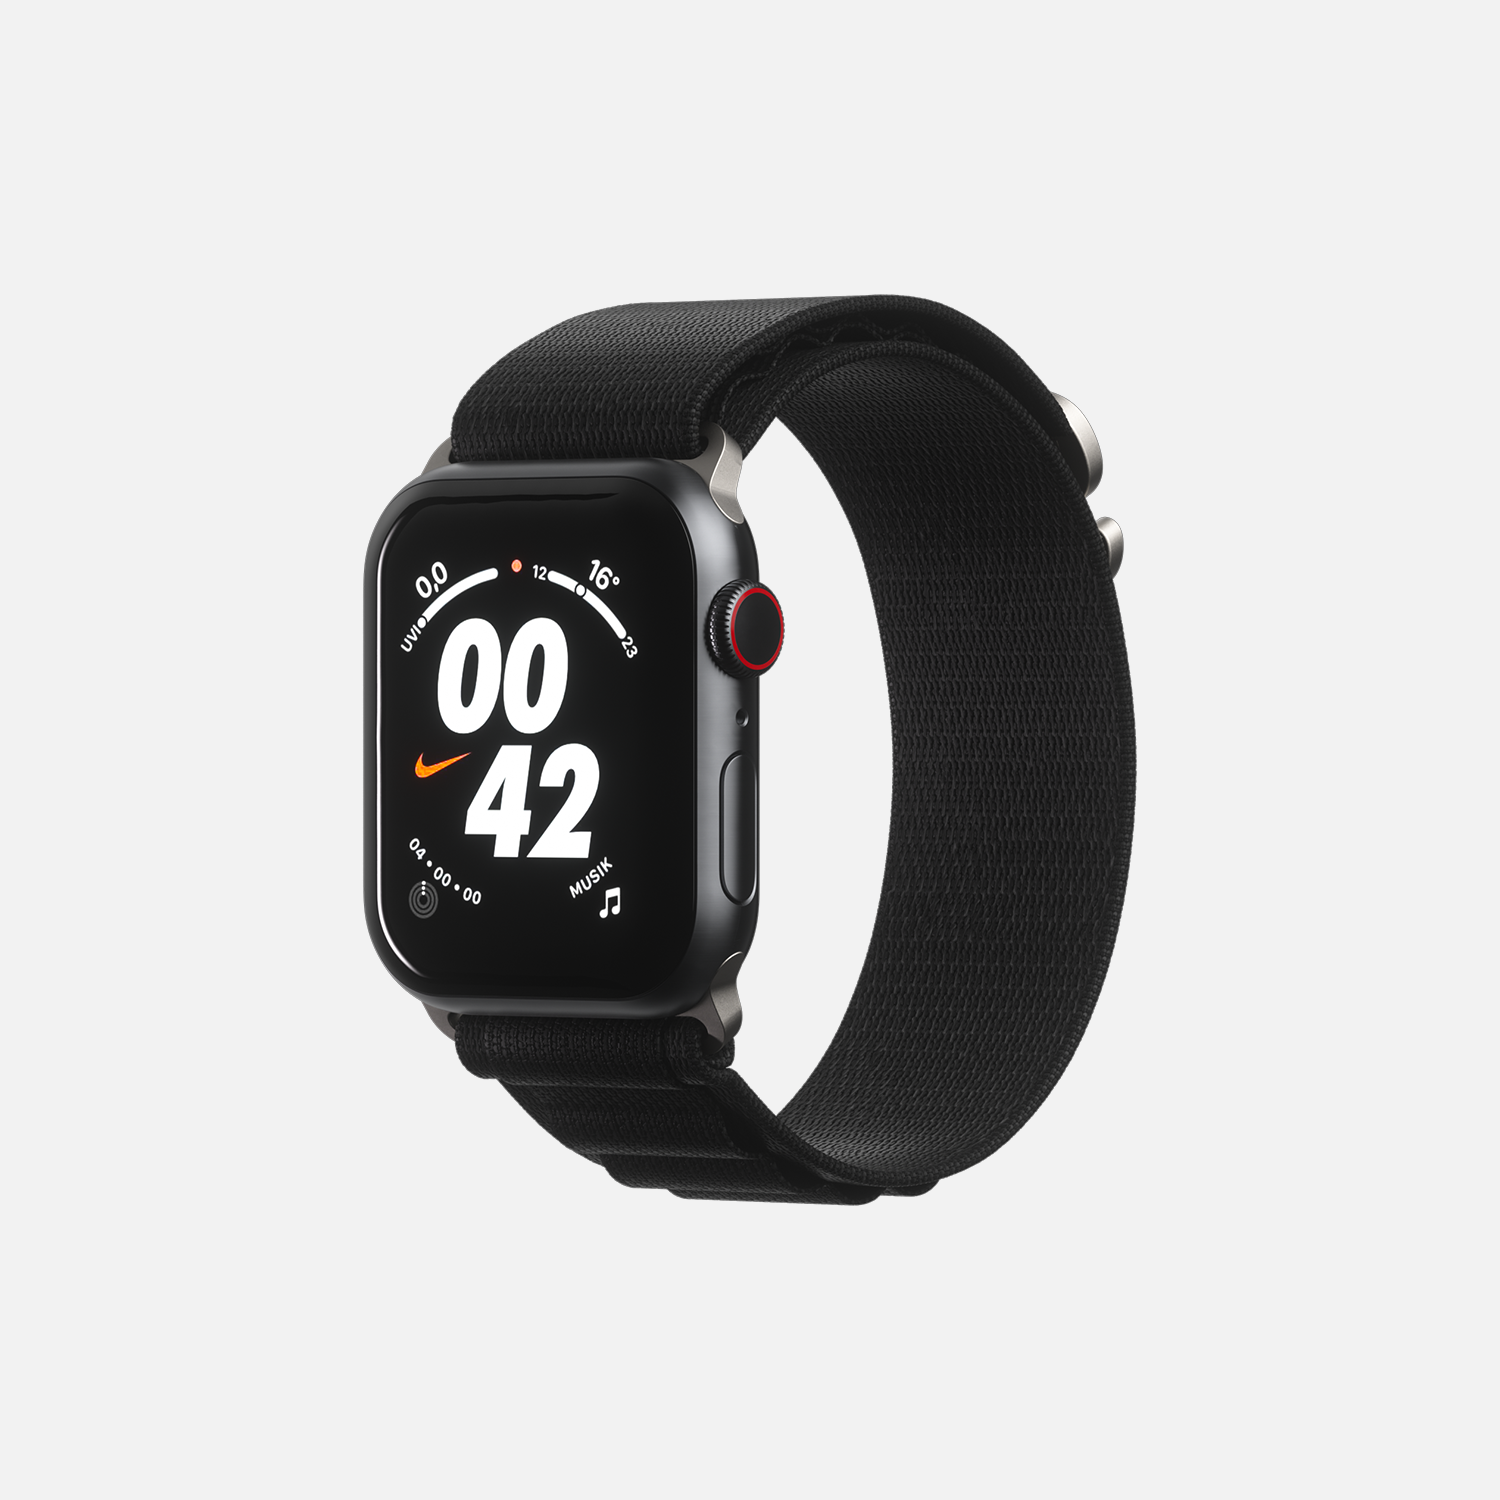 Black smartwatch with digital clock face and black sports band on a white background.